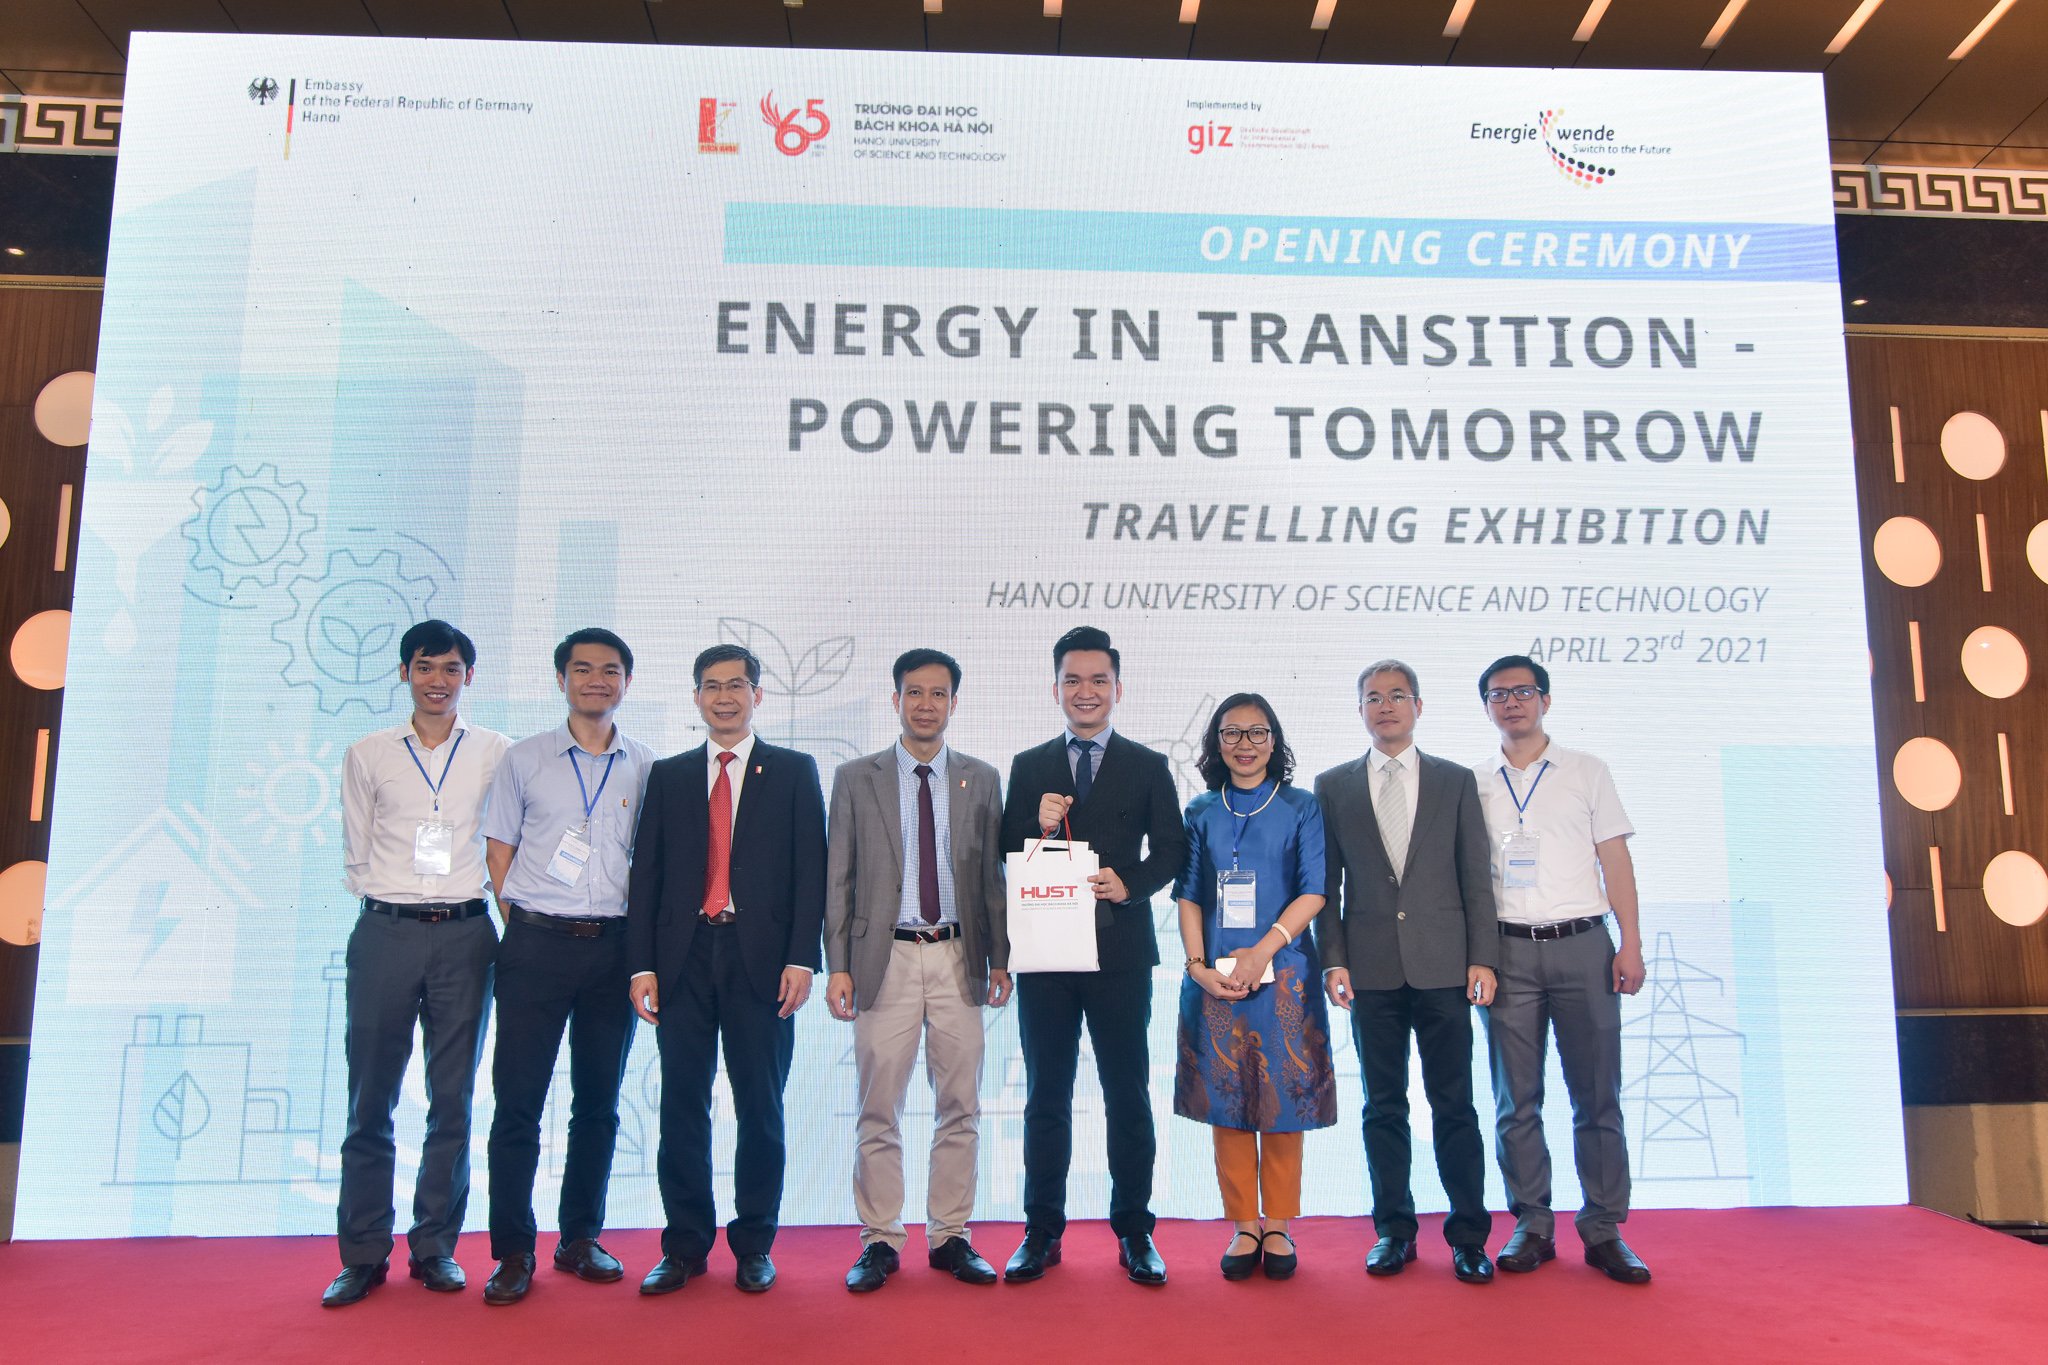 Eight guest of the travelling exhibition's opening ceremony in Hanoi, Vietnam, are standing at the stage in front of a big screen. On the screen, there is the title of the exhibition "Energy in Transition - Powering Tomorrow". April 2021.